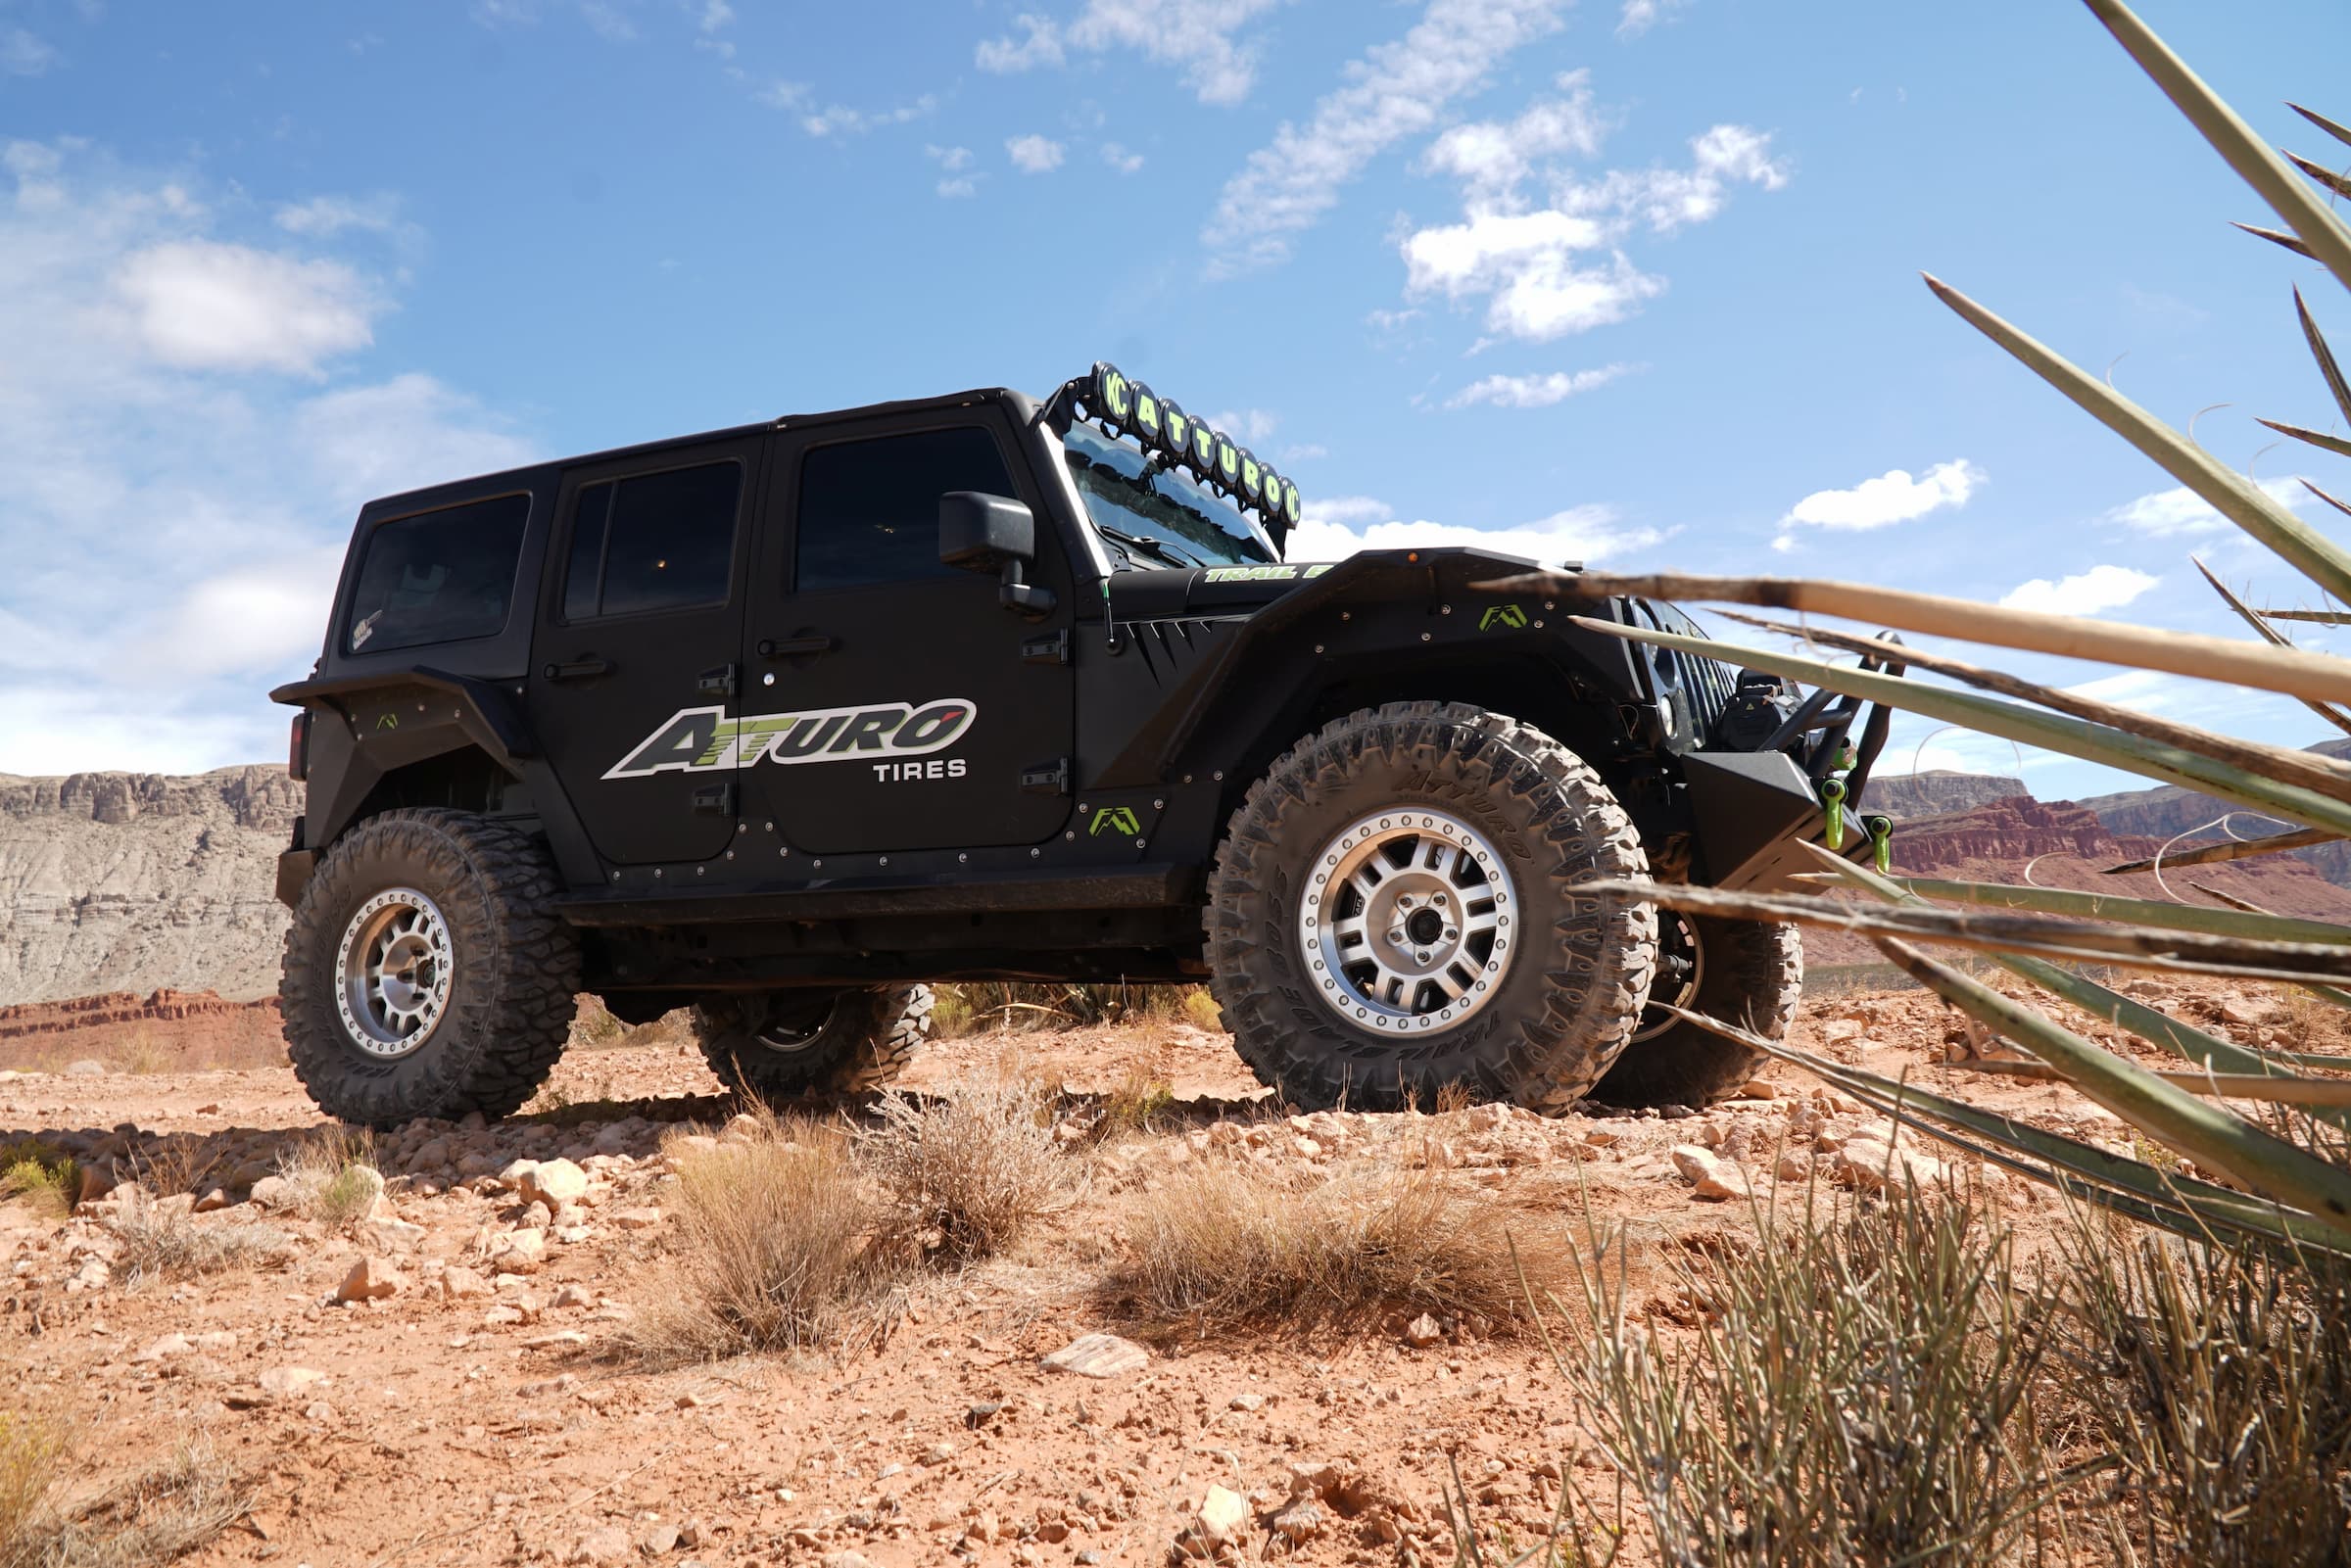 ATTURO TIRE TESTING NEW STICKY COMPOUND ON FOUR SPONSORED TRAILS AT EASTER JEEP SAFARI.